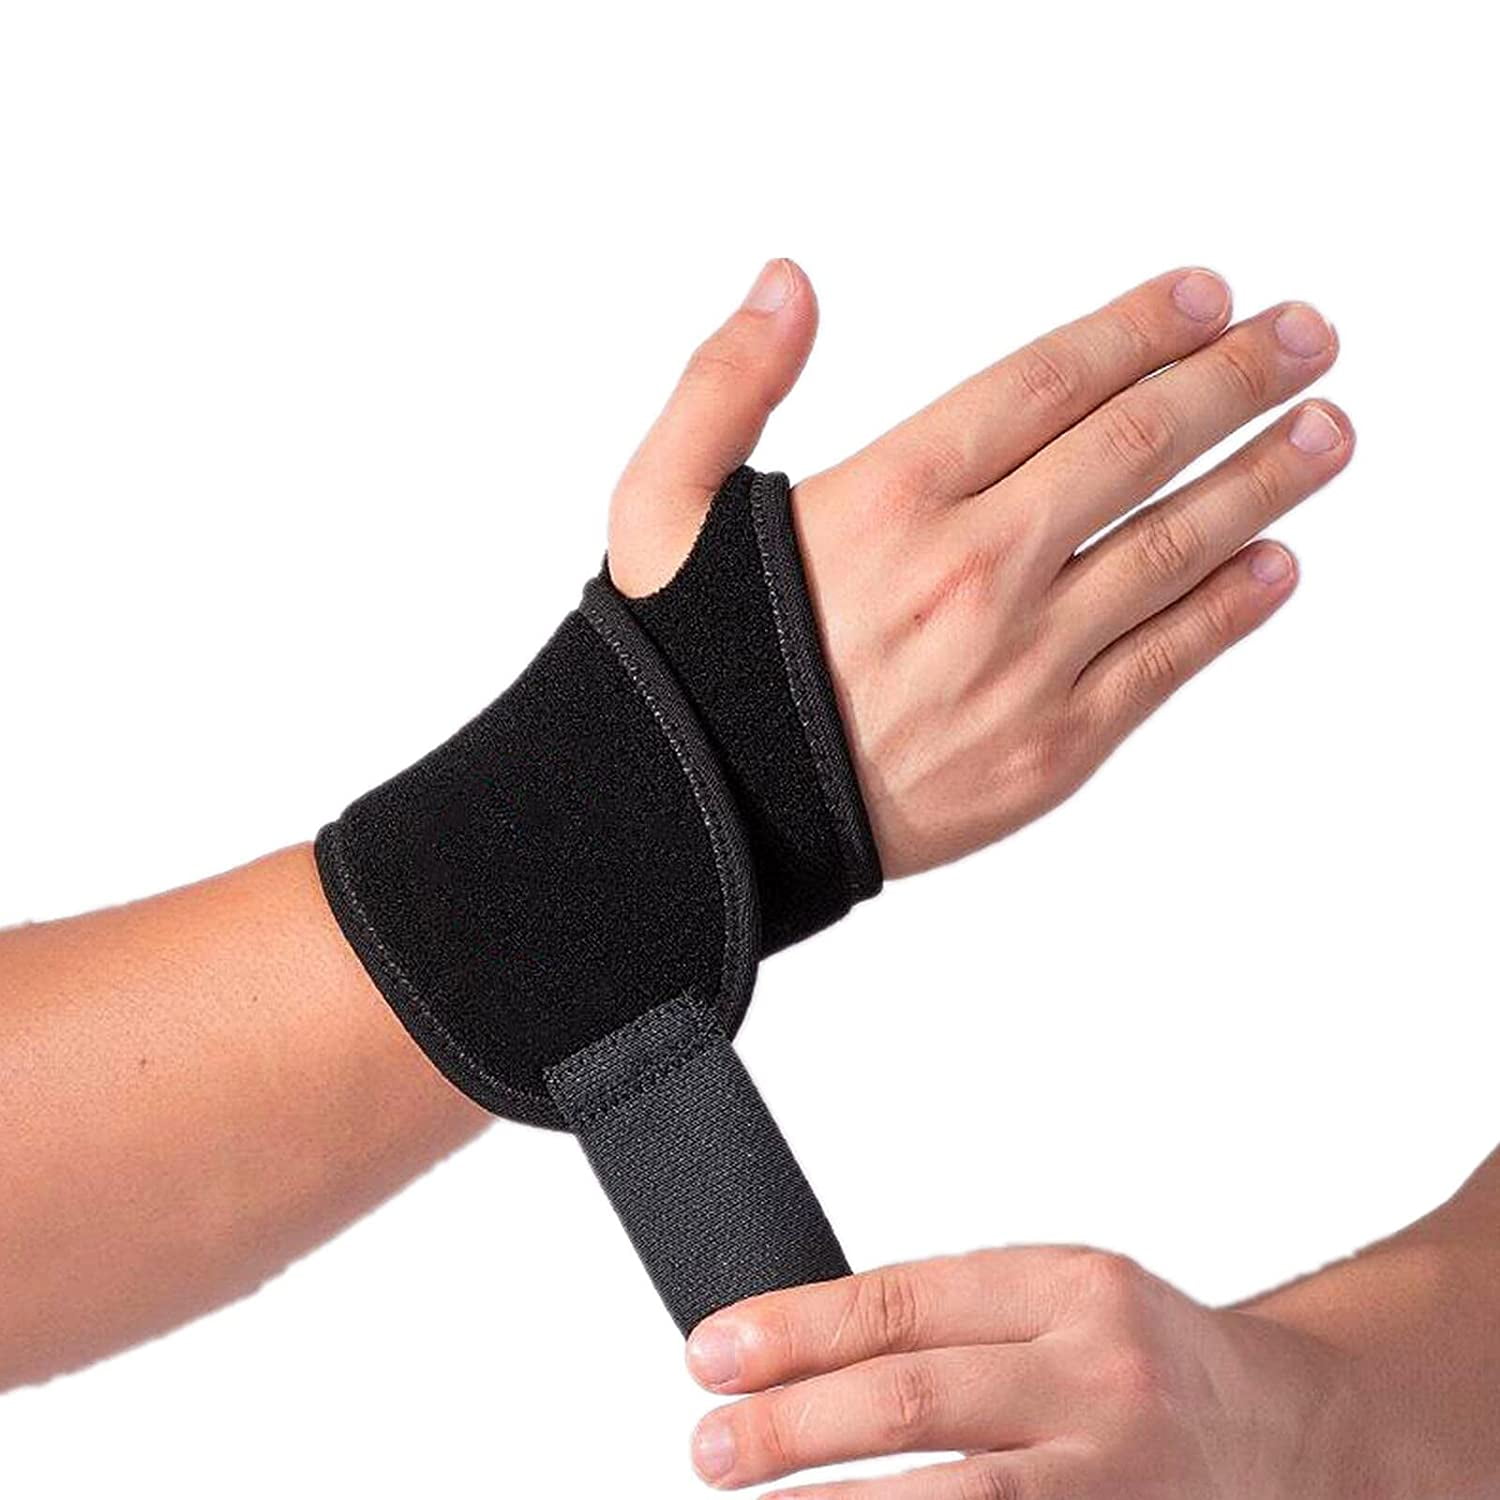 Copper Fit® Health Wrist Relief Plus Support Brace, One Size Fits